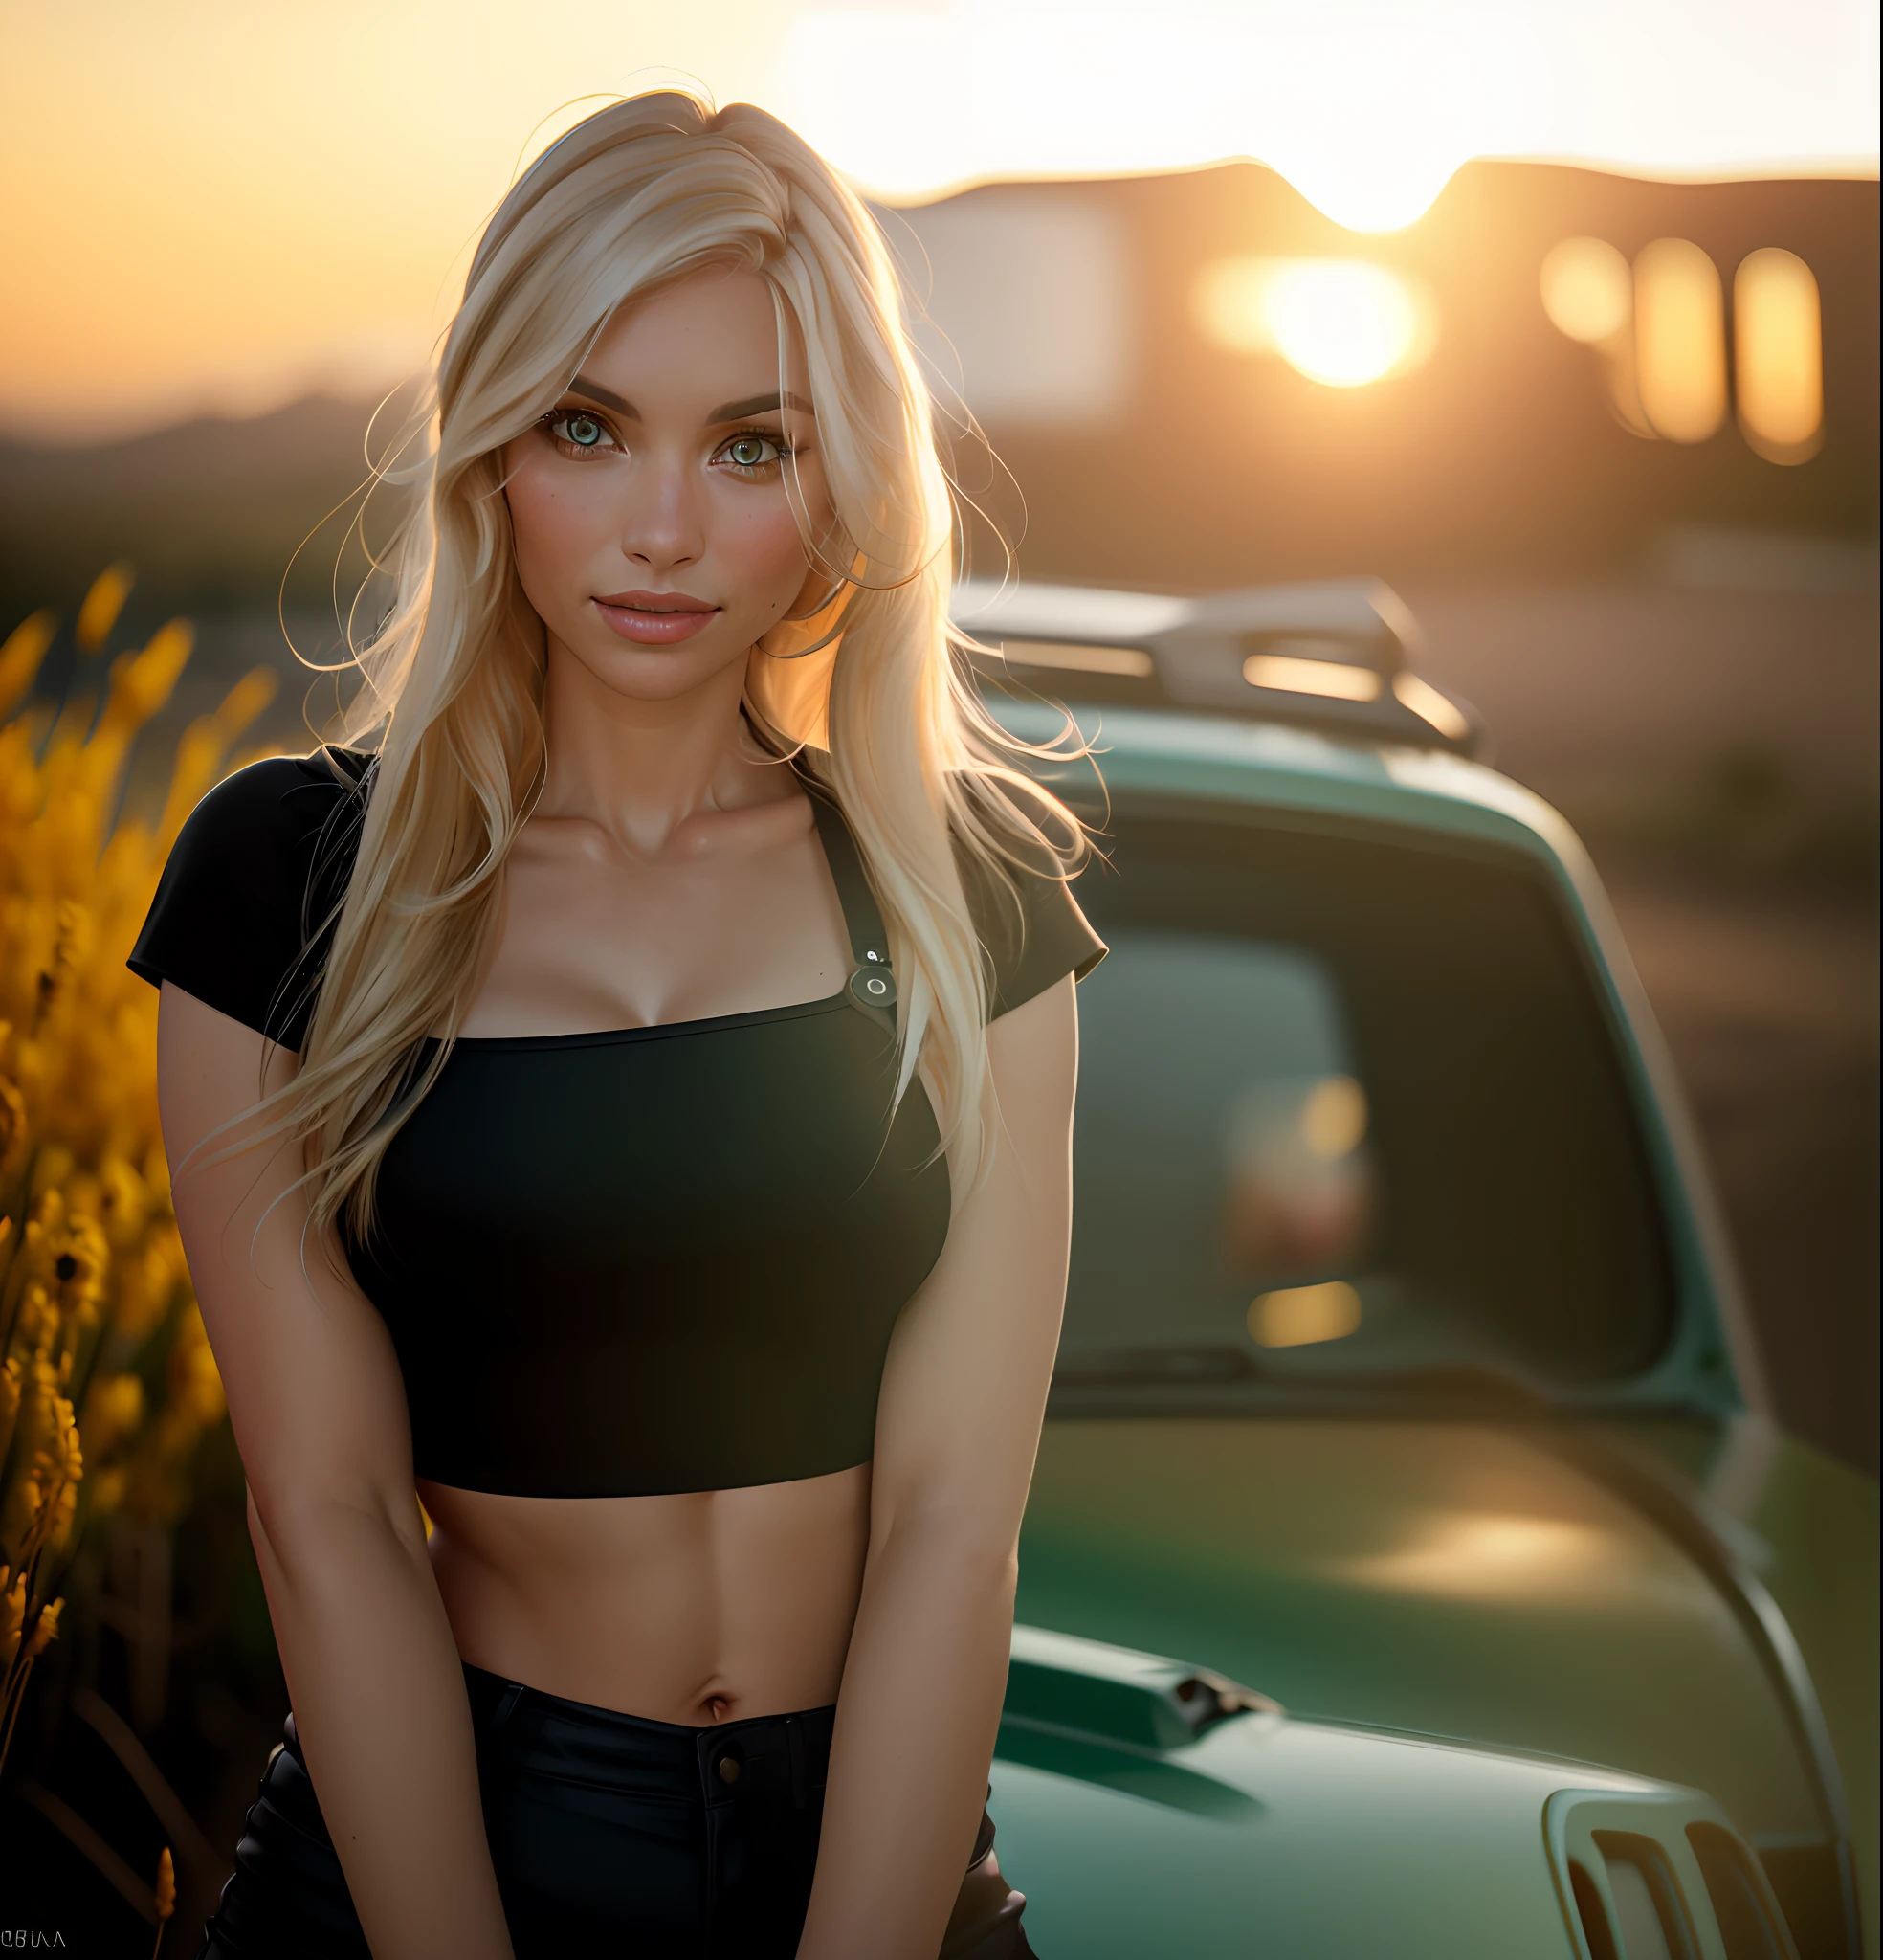 Arafed's beautiful wife standing in front of a jeep in a field, cute and smiling, Anna Nikonova aka Newmilky, beautiful blonde girl, Jeep no fundo,  appealing, in the sunset, foto perfil, instagram model, in the sunset, foto perfil 1024px, Aleksandra Waliszewska, mia kischner, Sidnei Sweeney, fotrrealisitic, fot, Masterpiece artwork, realisitic, 真实感, rendering, hight contrast, digitl art, fotográficorealisitic, trend in Artstation 8k HD, high definiton, circunstanciado, Realistic, detailed, texture skin, hiperdetailed, Textura realisitic da pele, best qualityer, ultra high-resolution, (fotrrealisitic: 1.4), high resolution, detailed, fot crua, sharp resolution, Nikon D850 movies, fot de stock 4, Kodak Portra 400 Camera F1 Lens.6, textura hiper realisitic, lighting dramatic, Unrealistic trend in Artstation Cinestill 800, .RAW. Directed by: Lee Jeffries.